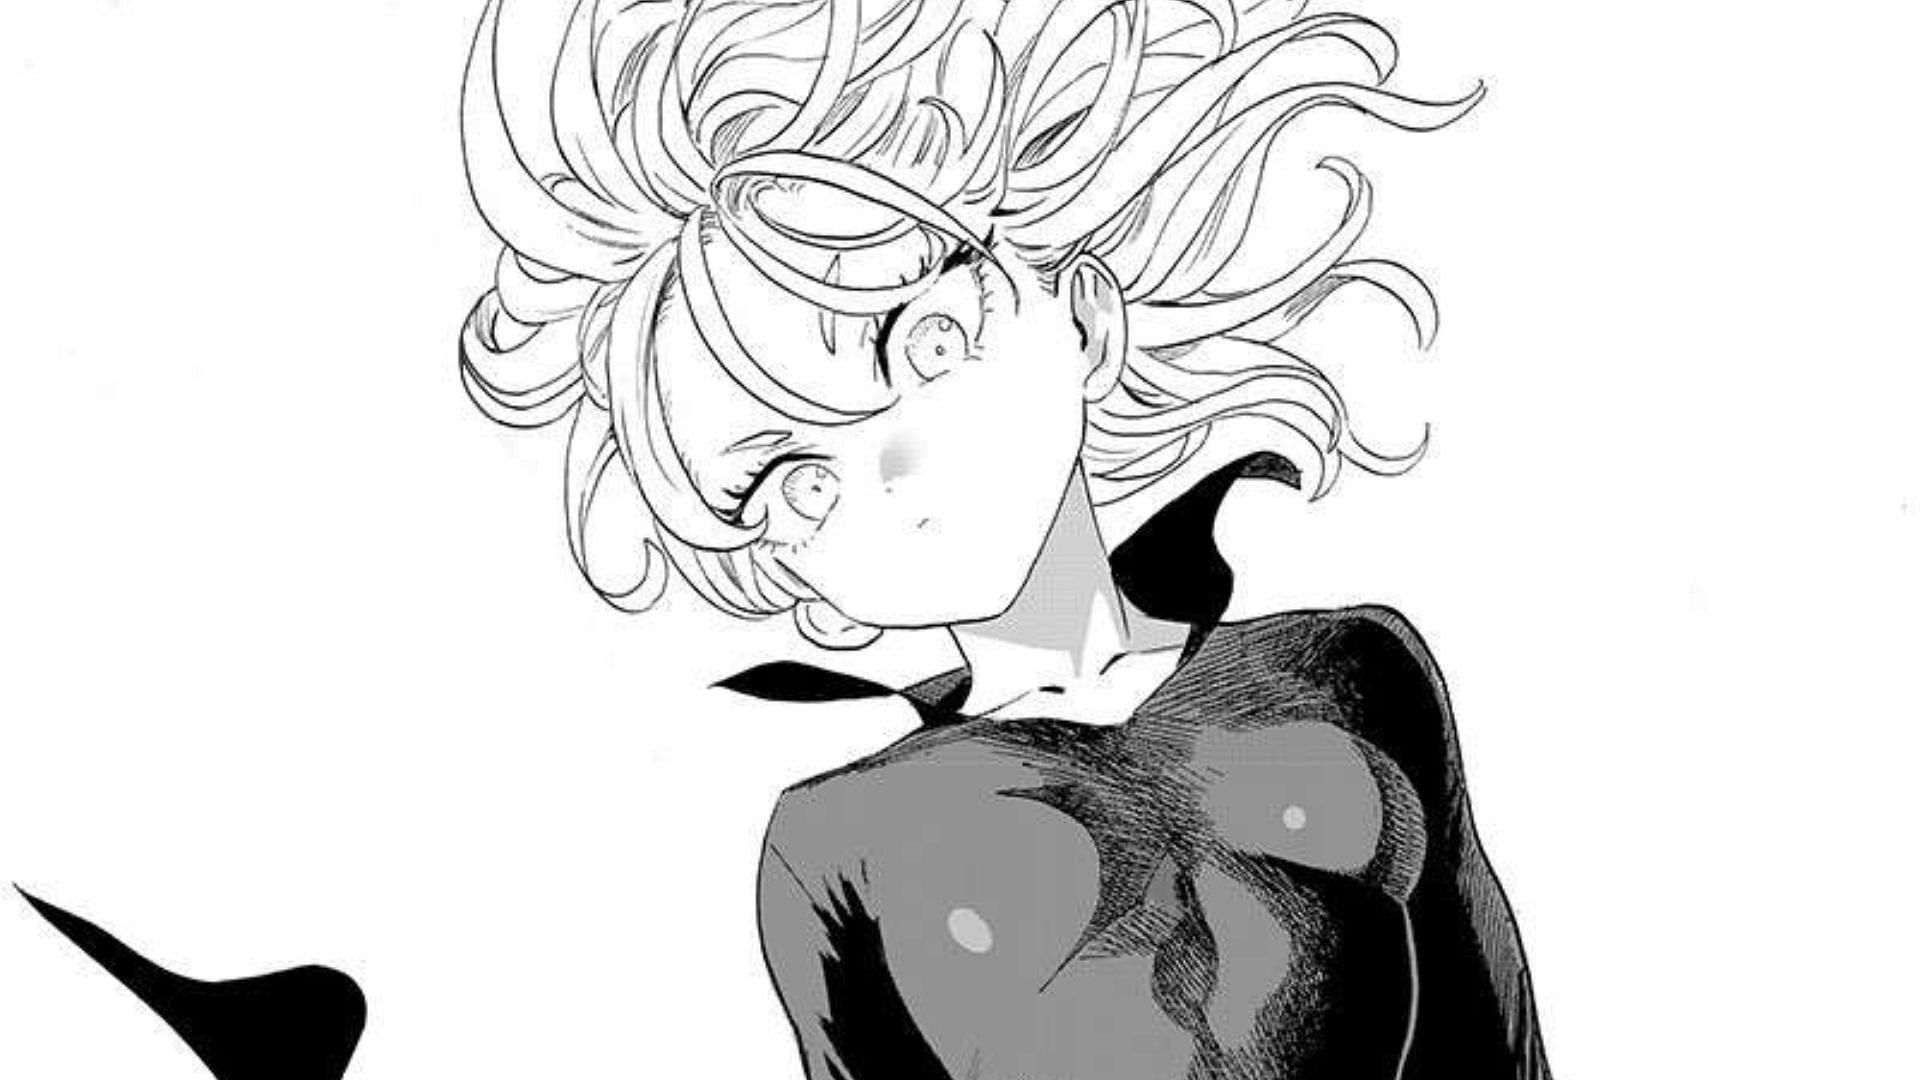 Tatsumaki as seen in One Punch Man (Image via Madhouse)